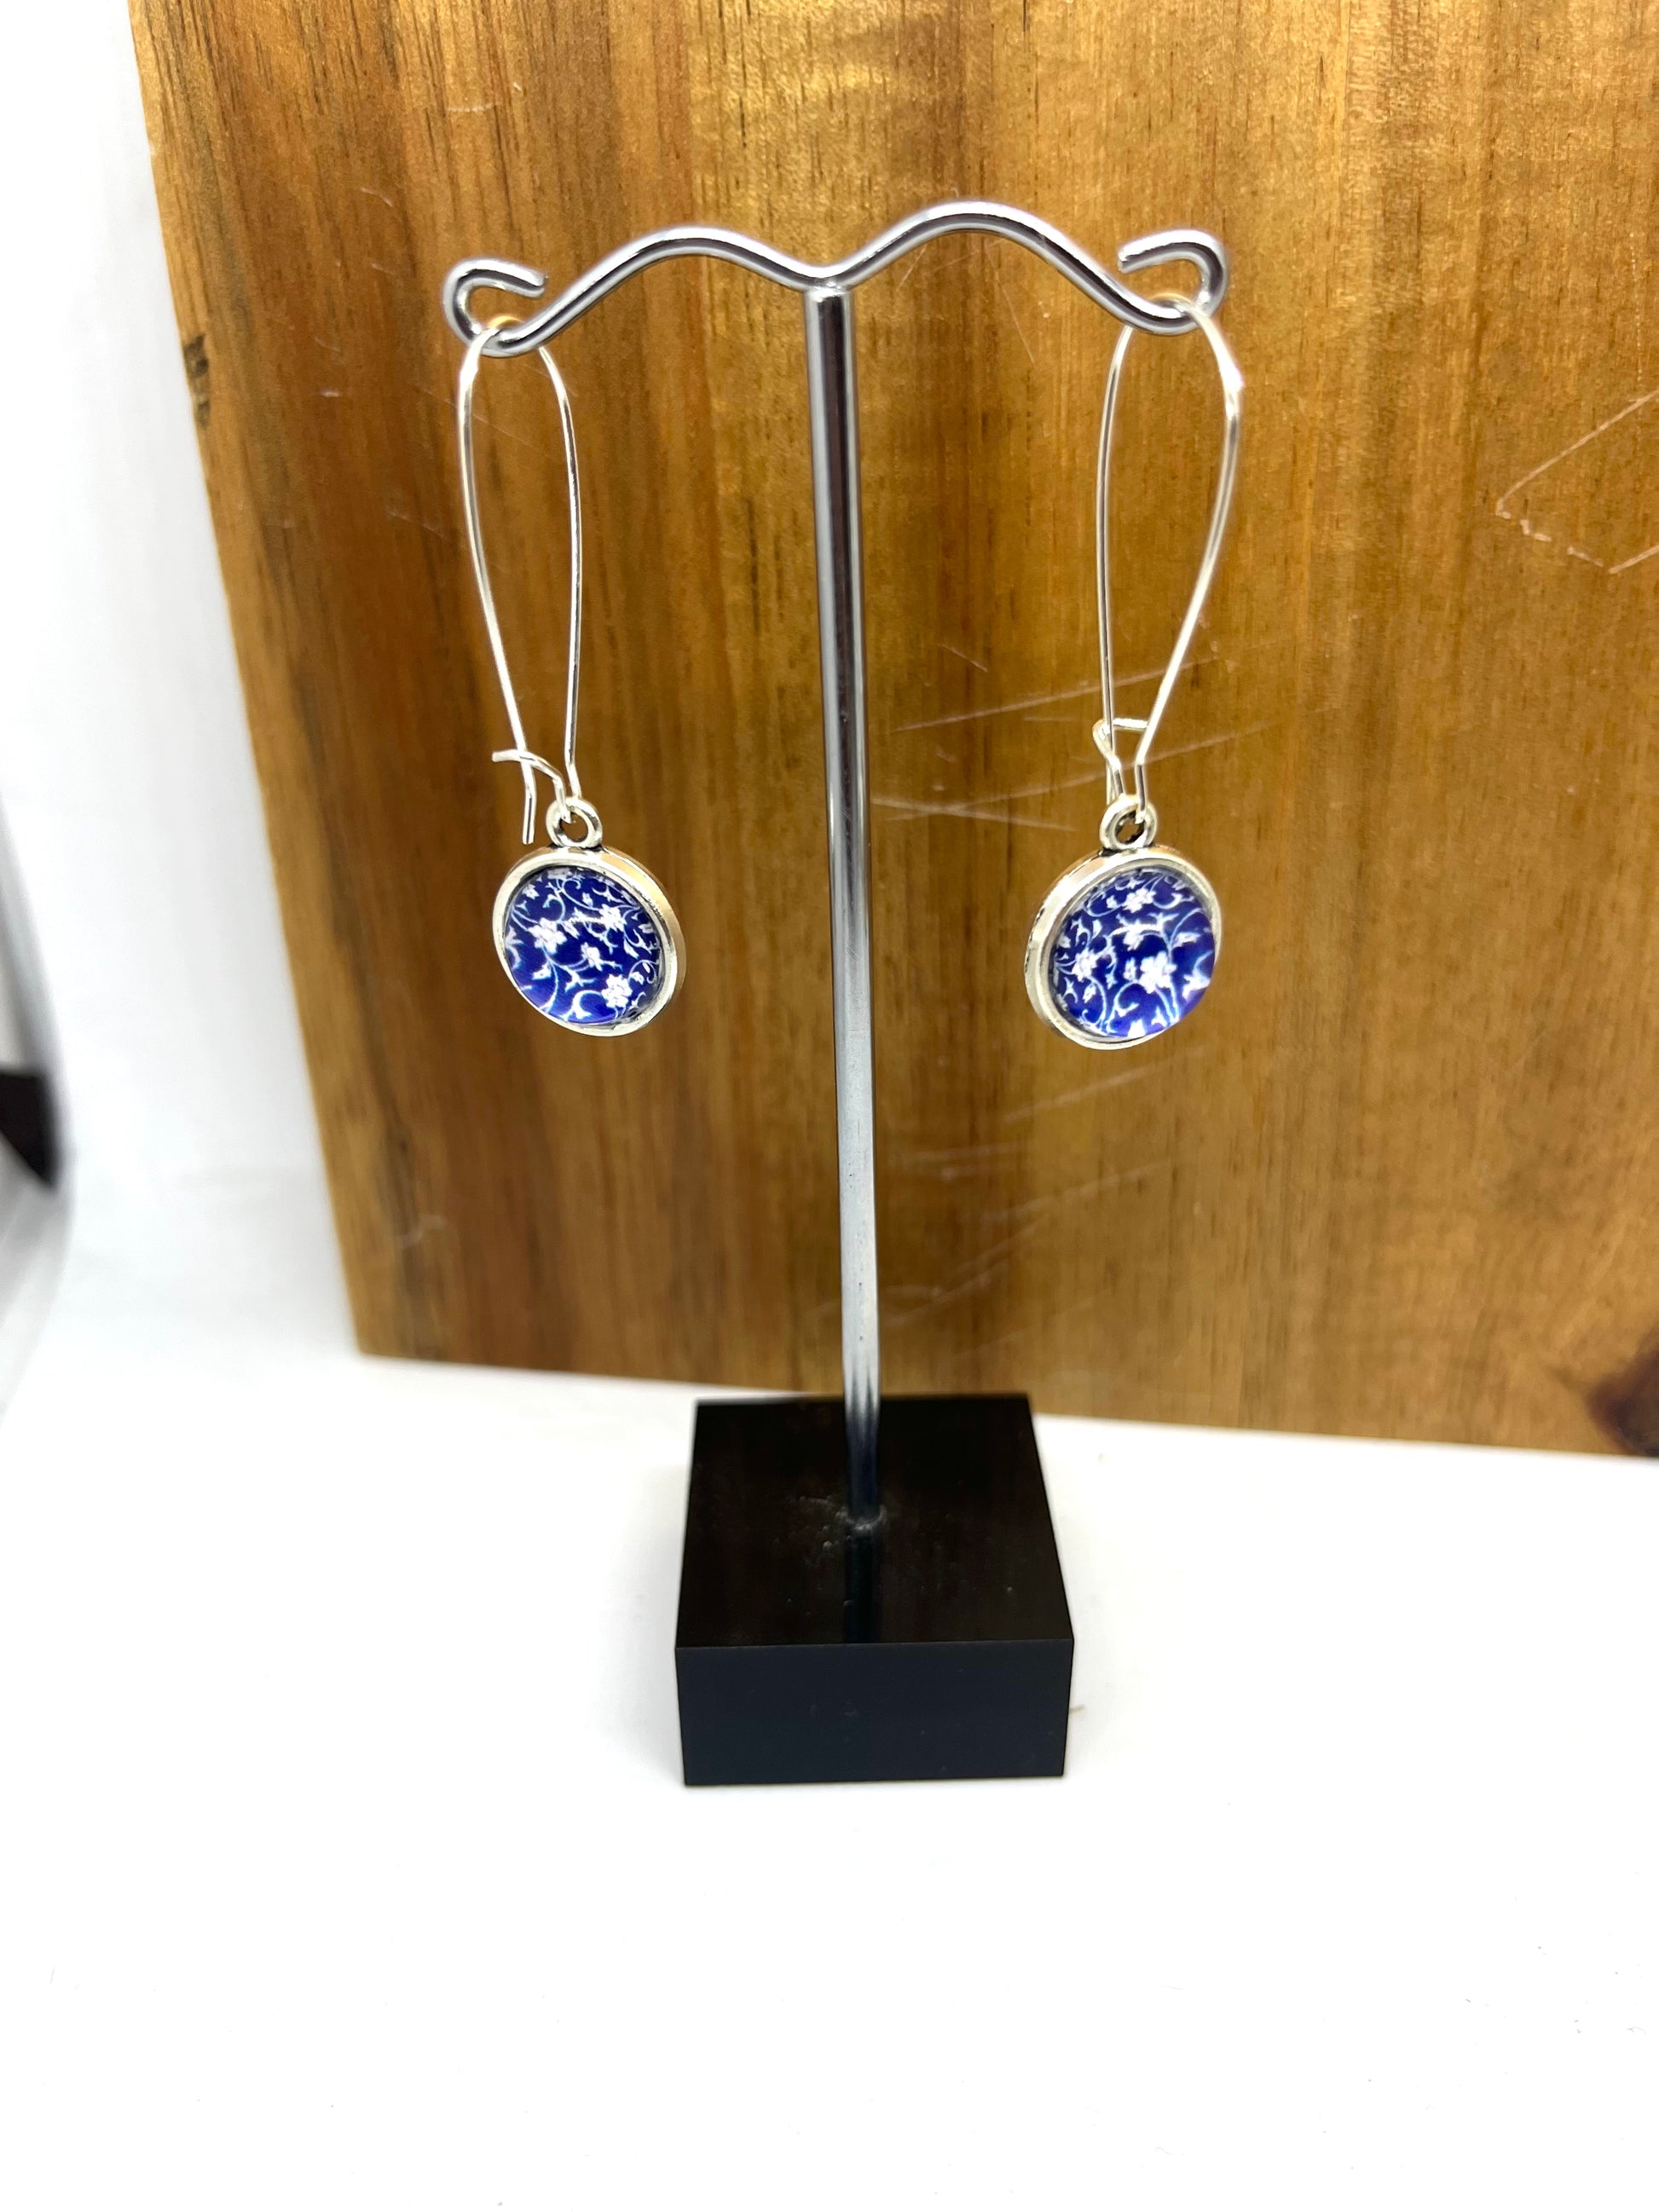 Double sided glass dome earrings with blue china pattern 